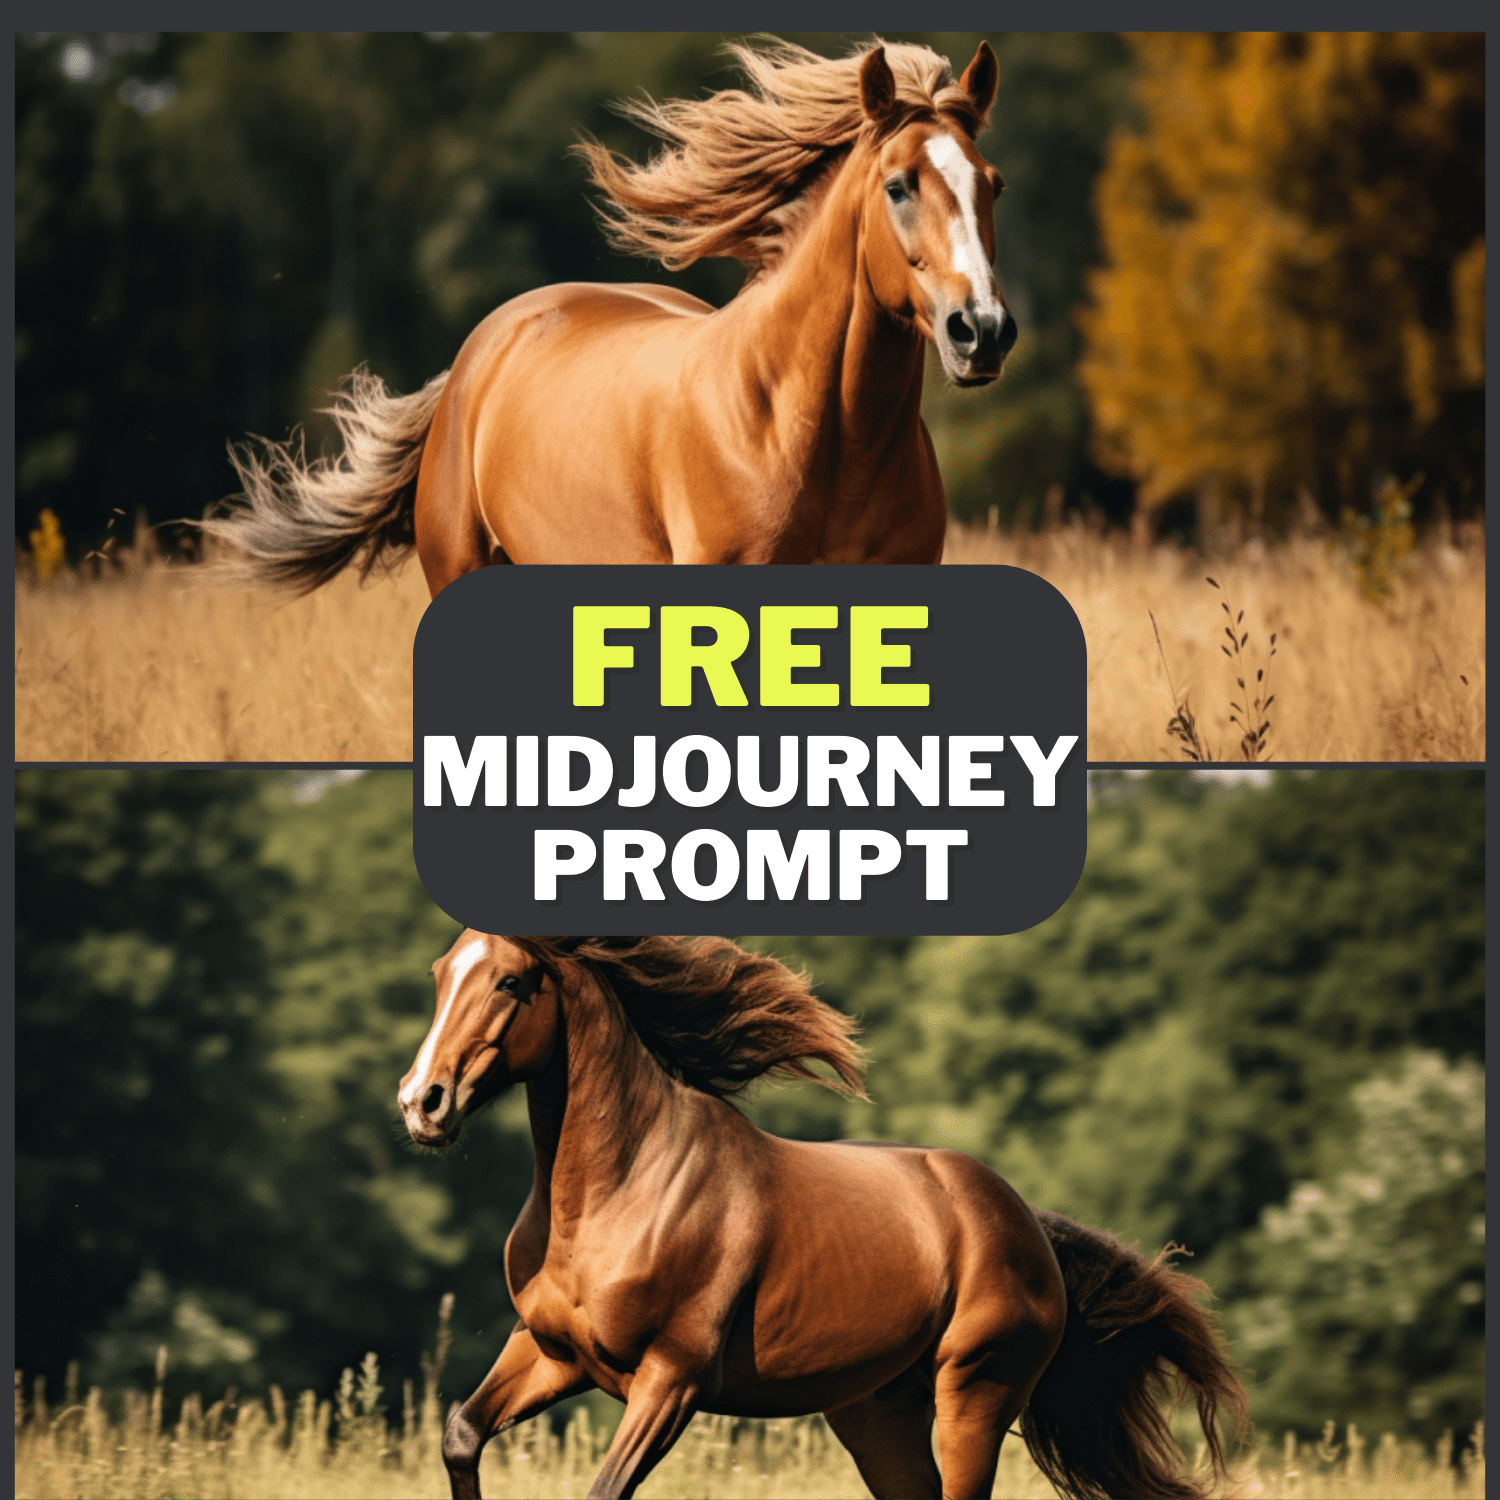 Horse Nature Photography Free Midjourney Prompt 1